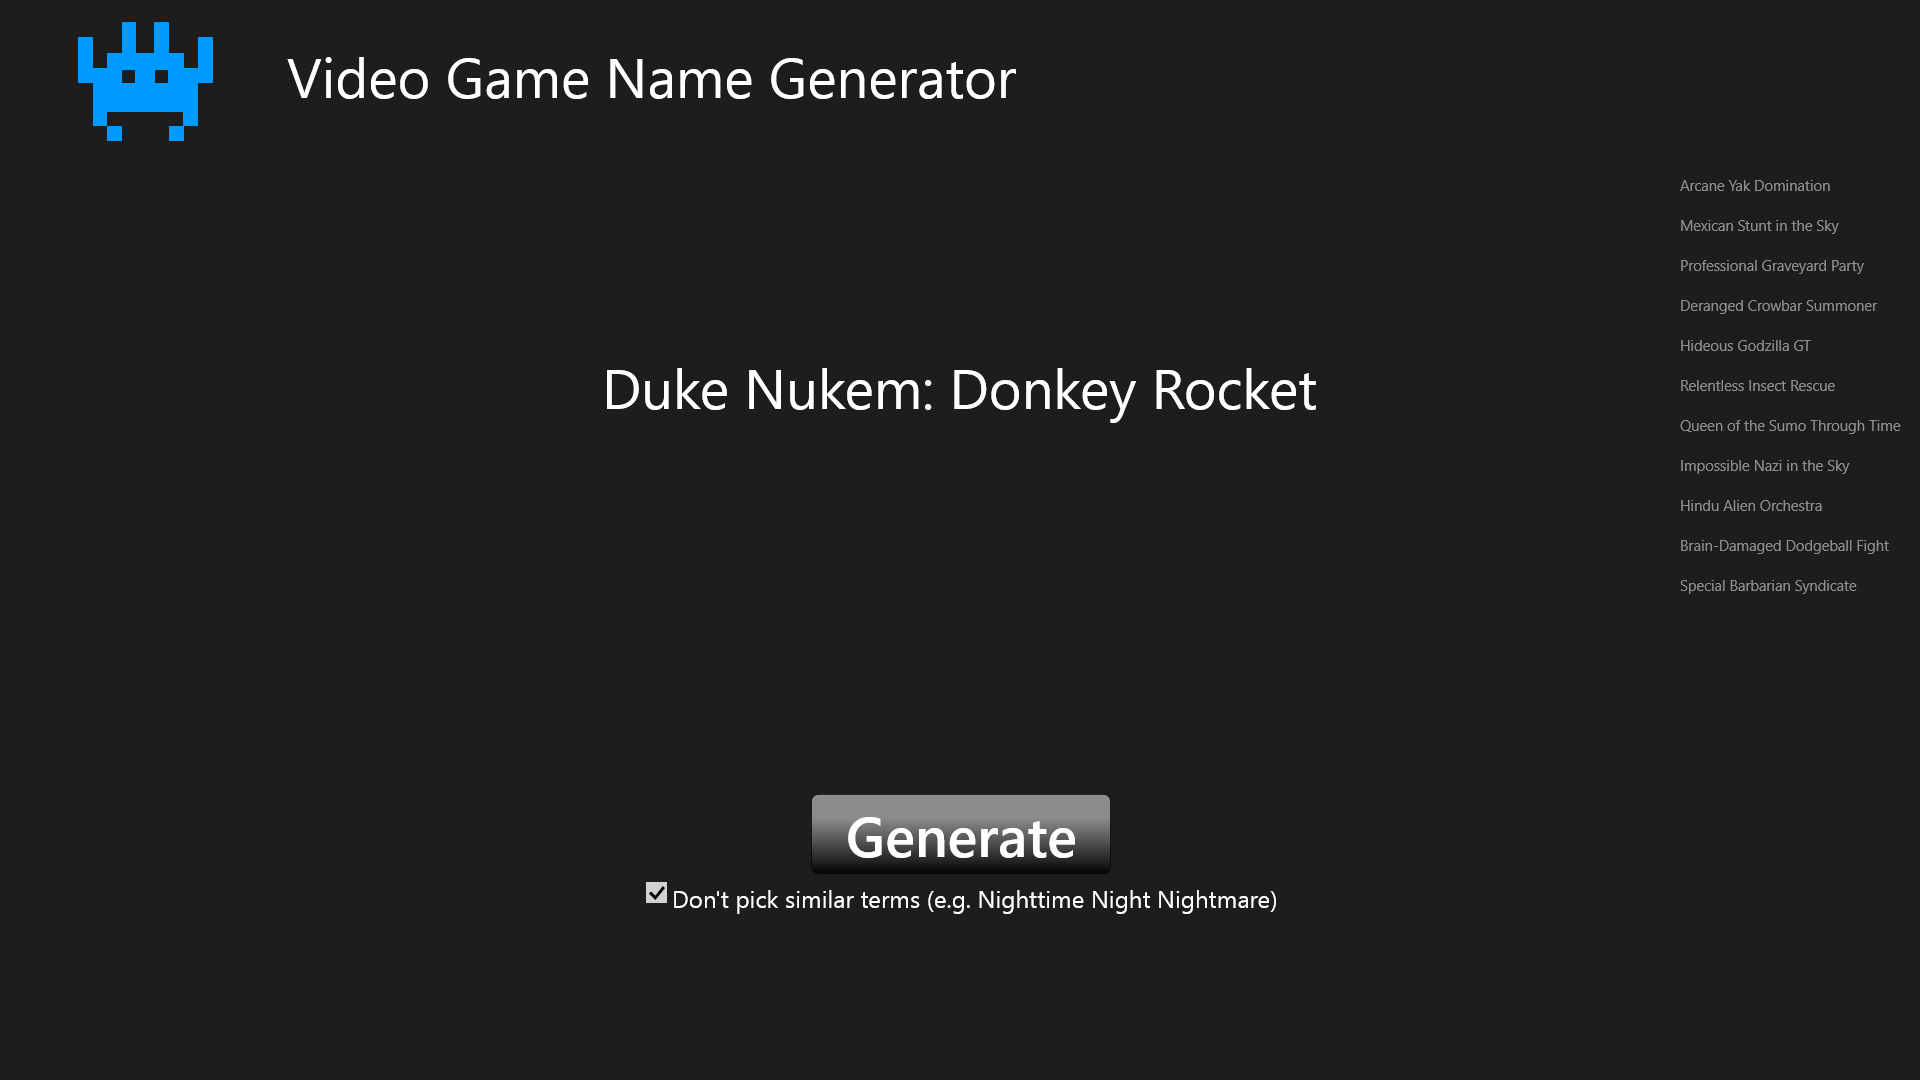 Generated name with list of names previously generated